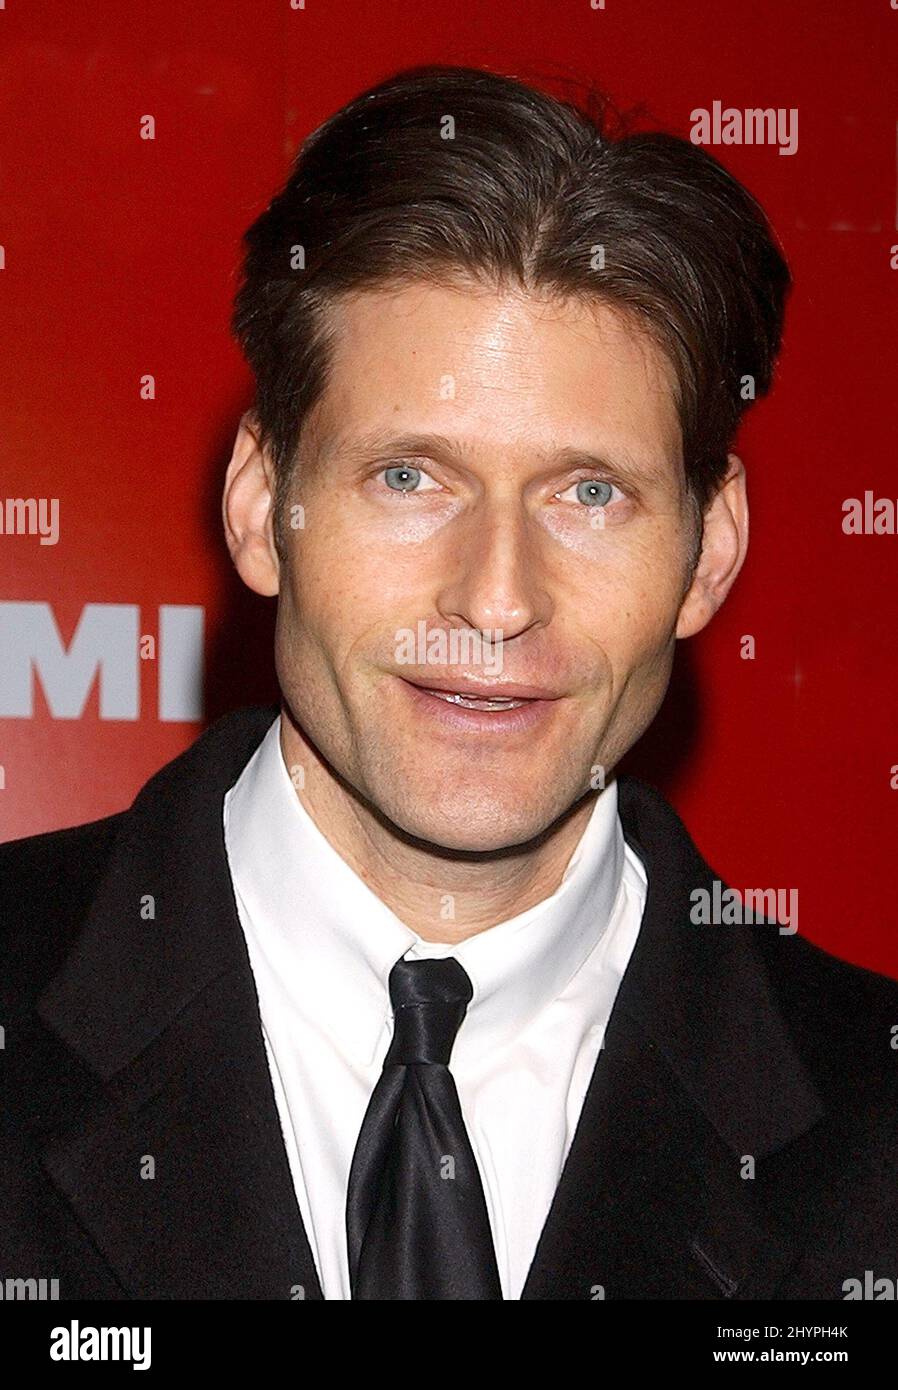 CRISPIN GLOVER ATTENDS THE EMI POST GRAMMY PARTY IN LOS ANGELES. PICTURE: UK PRESS Stock Photo